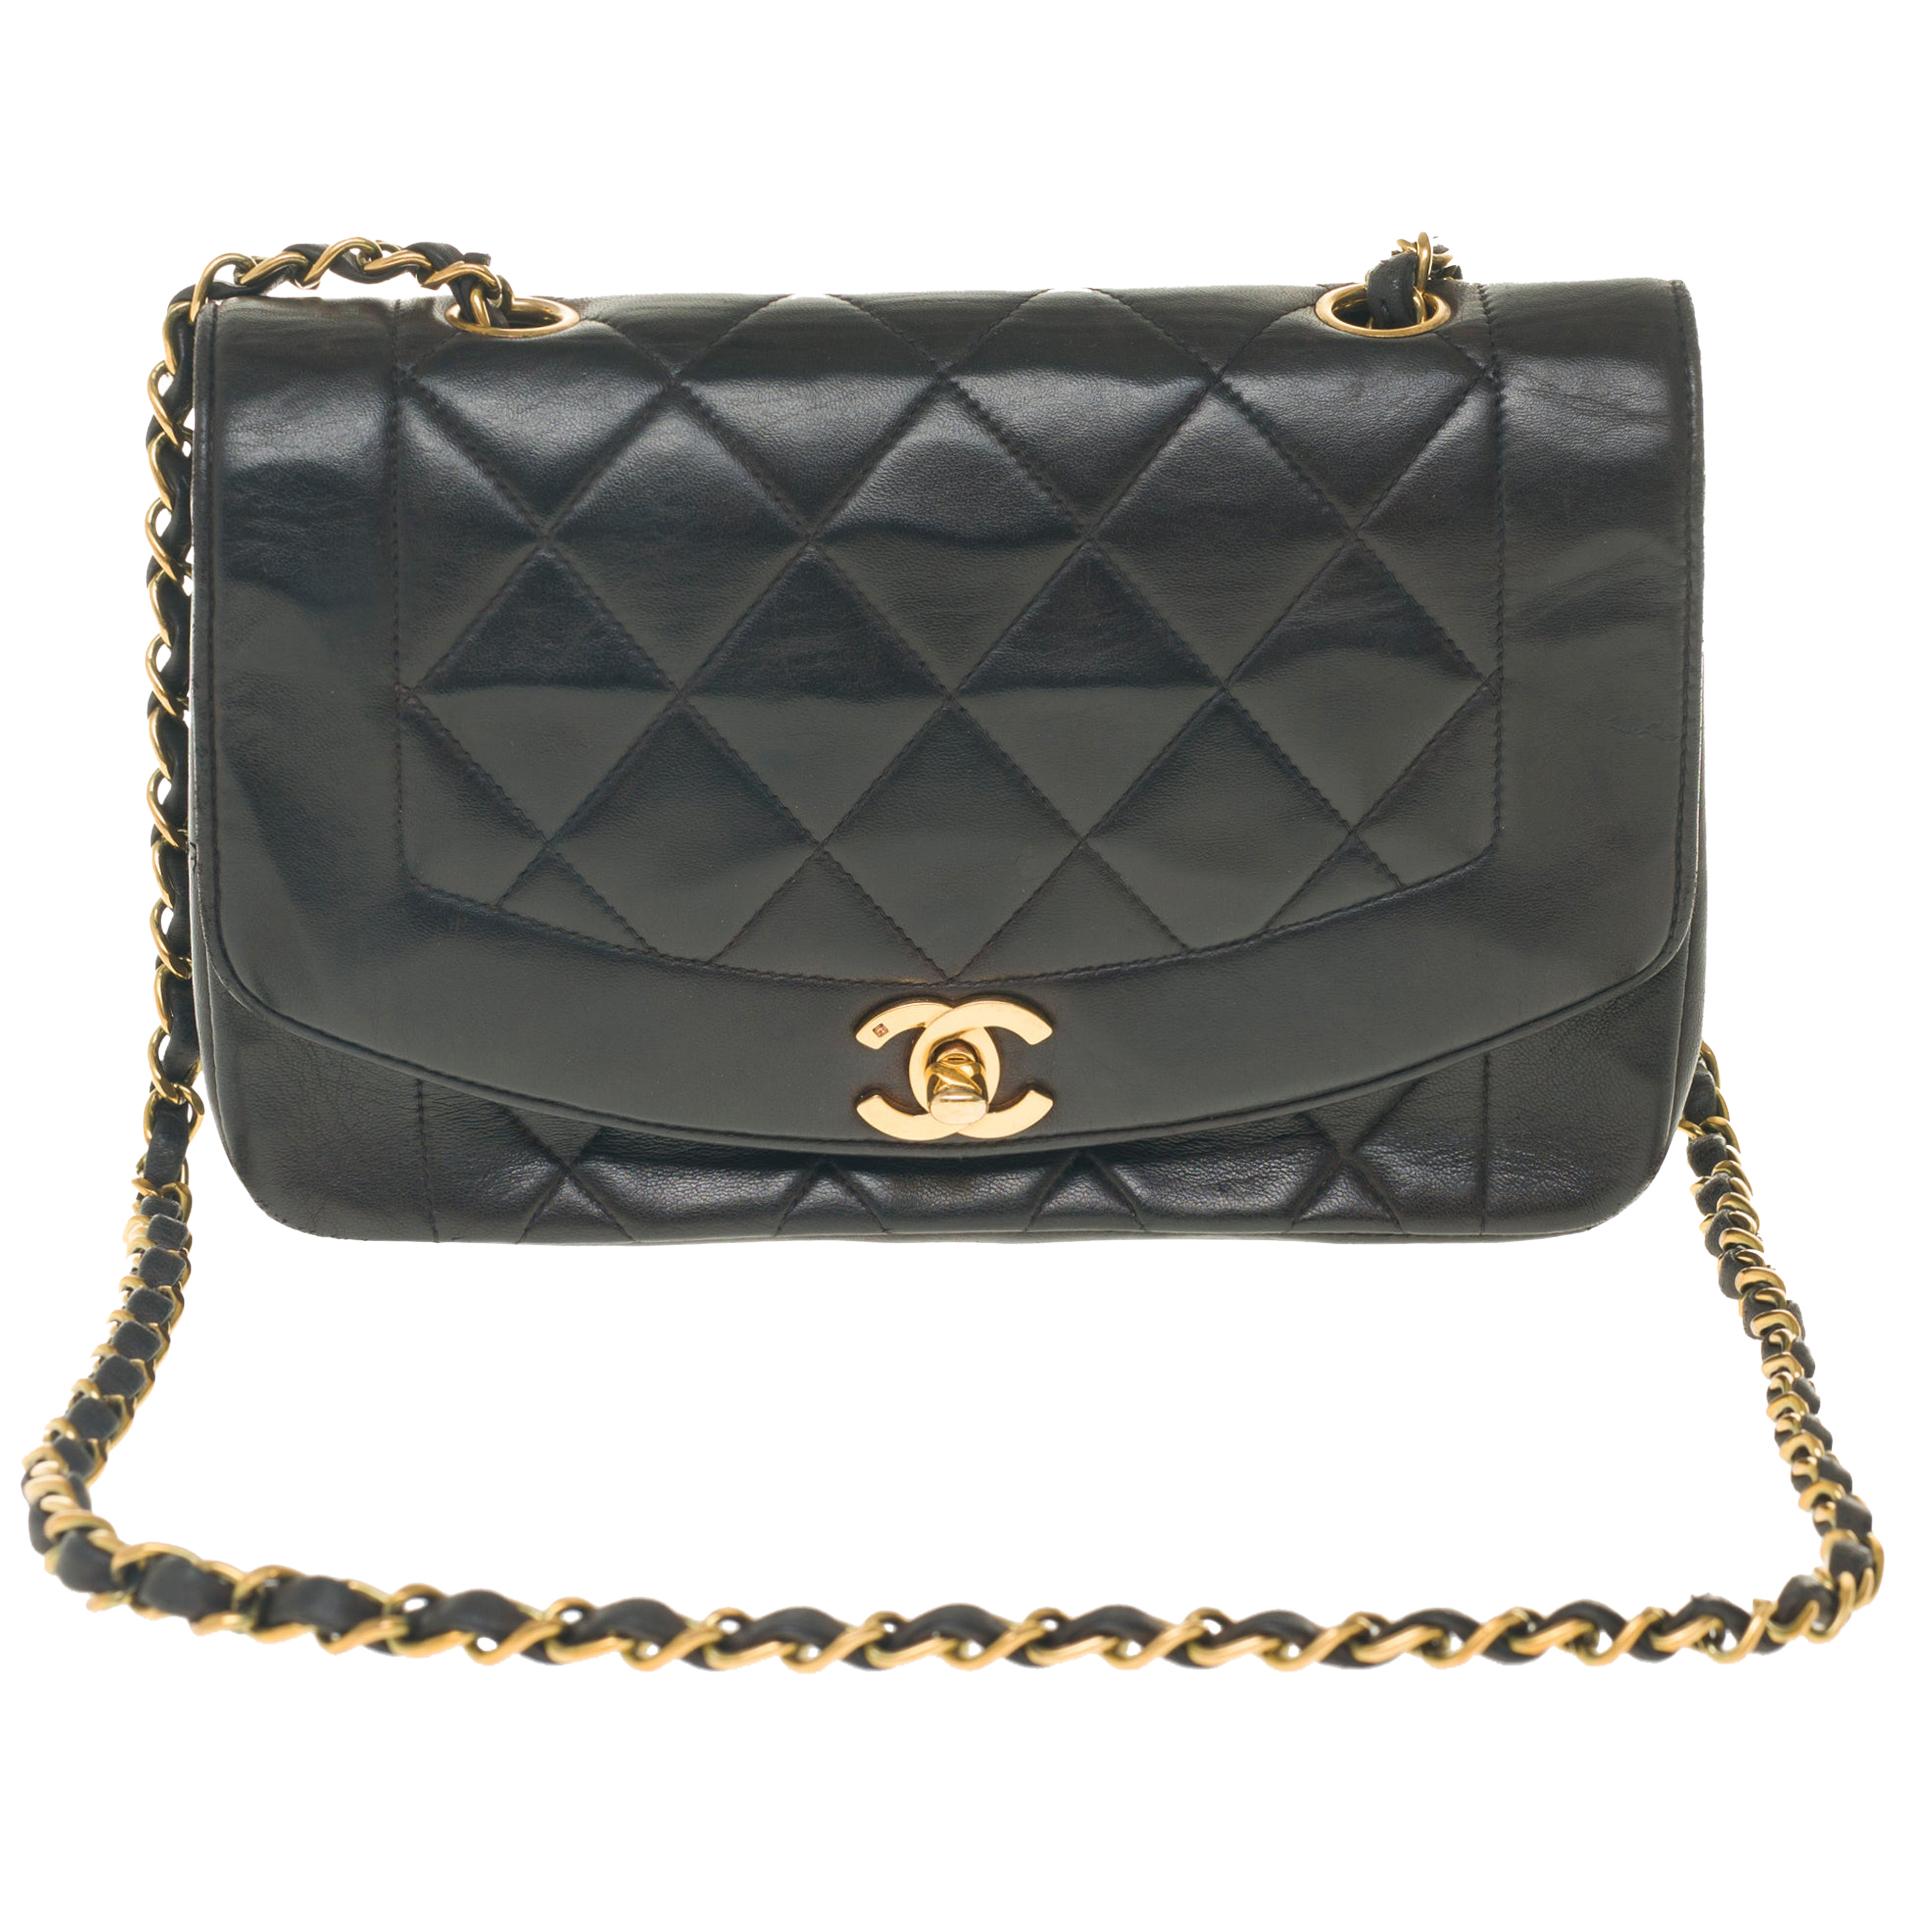 Stunning Chanel Diana Shoulder bag in black quilted lambskin with gold hardware